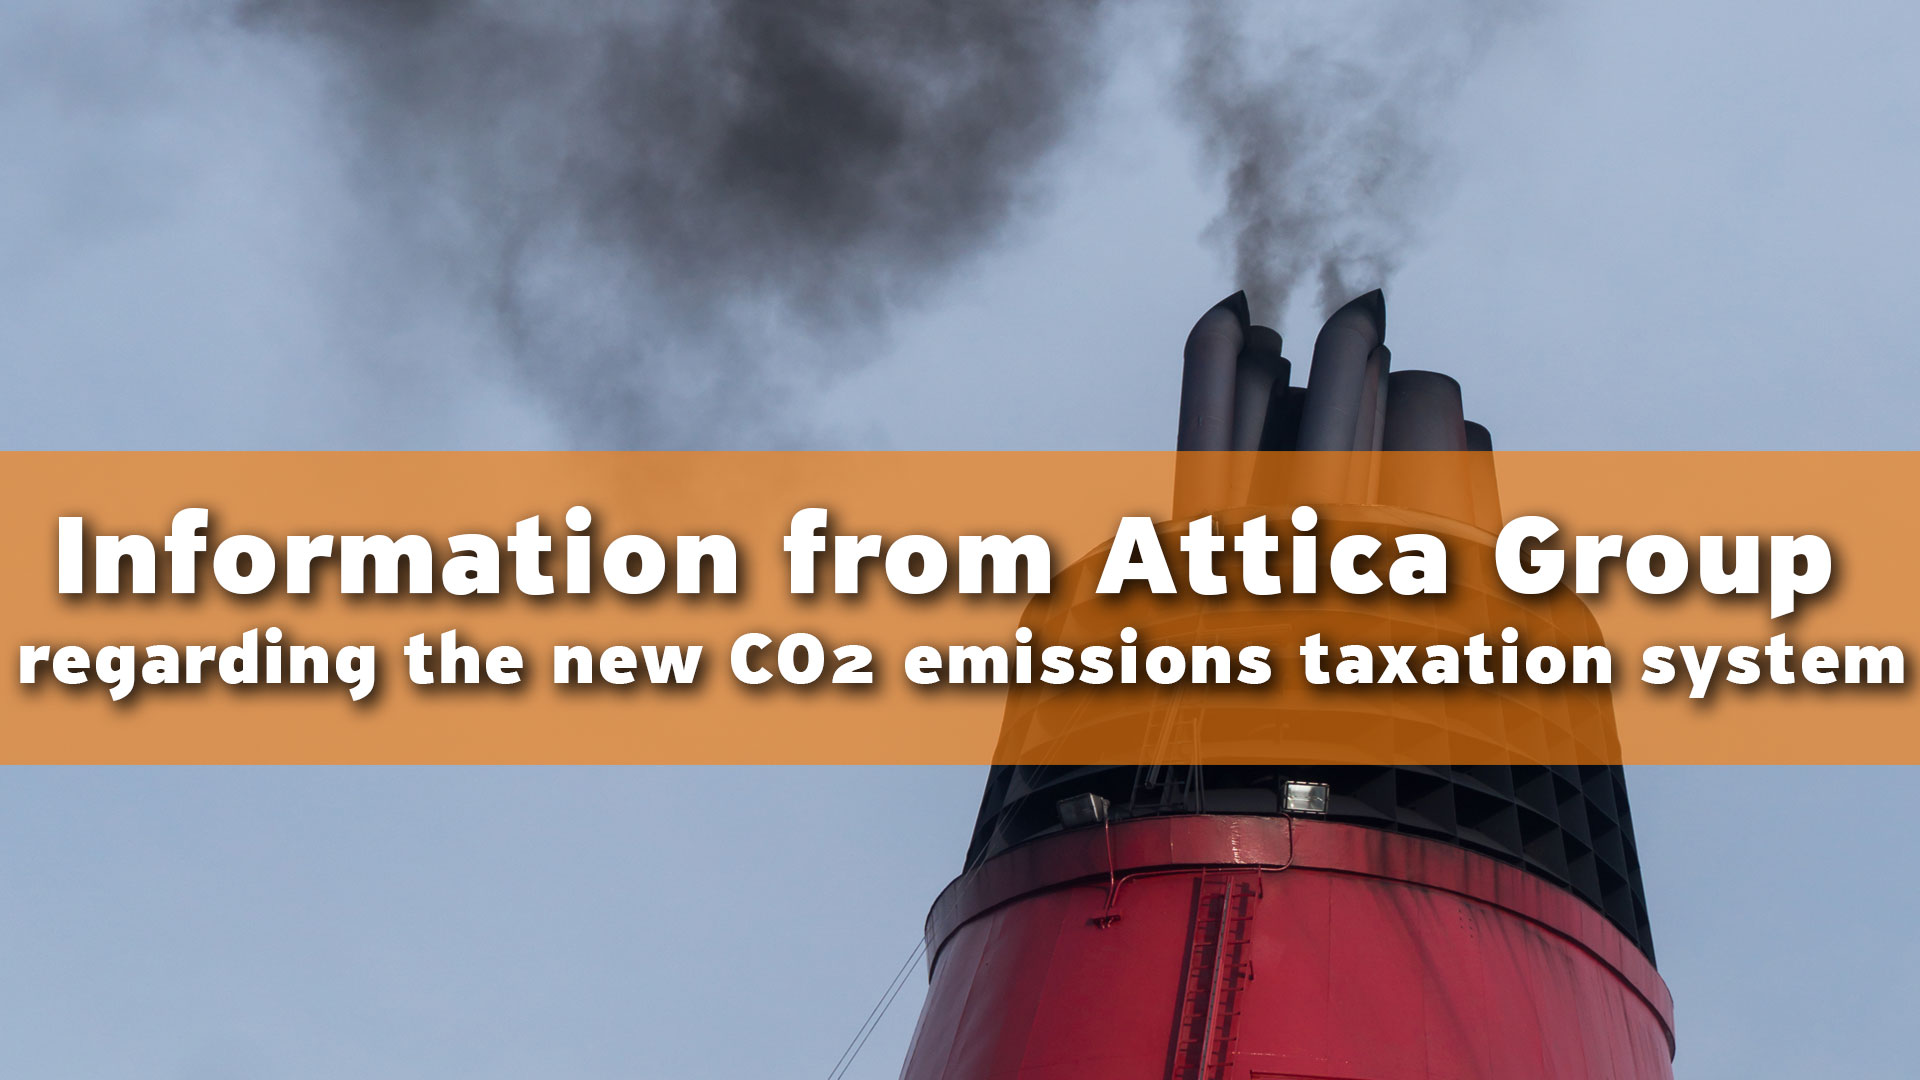 Information from Grimaldi Group regarding the new CO2 emissions taxation system